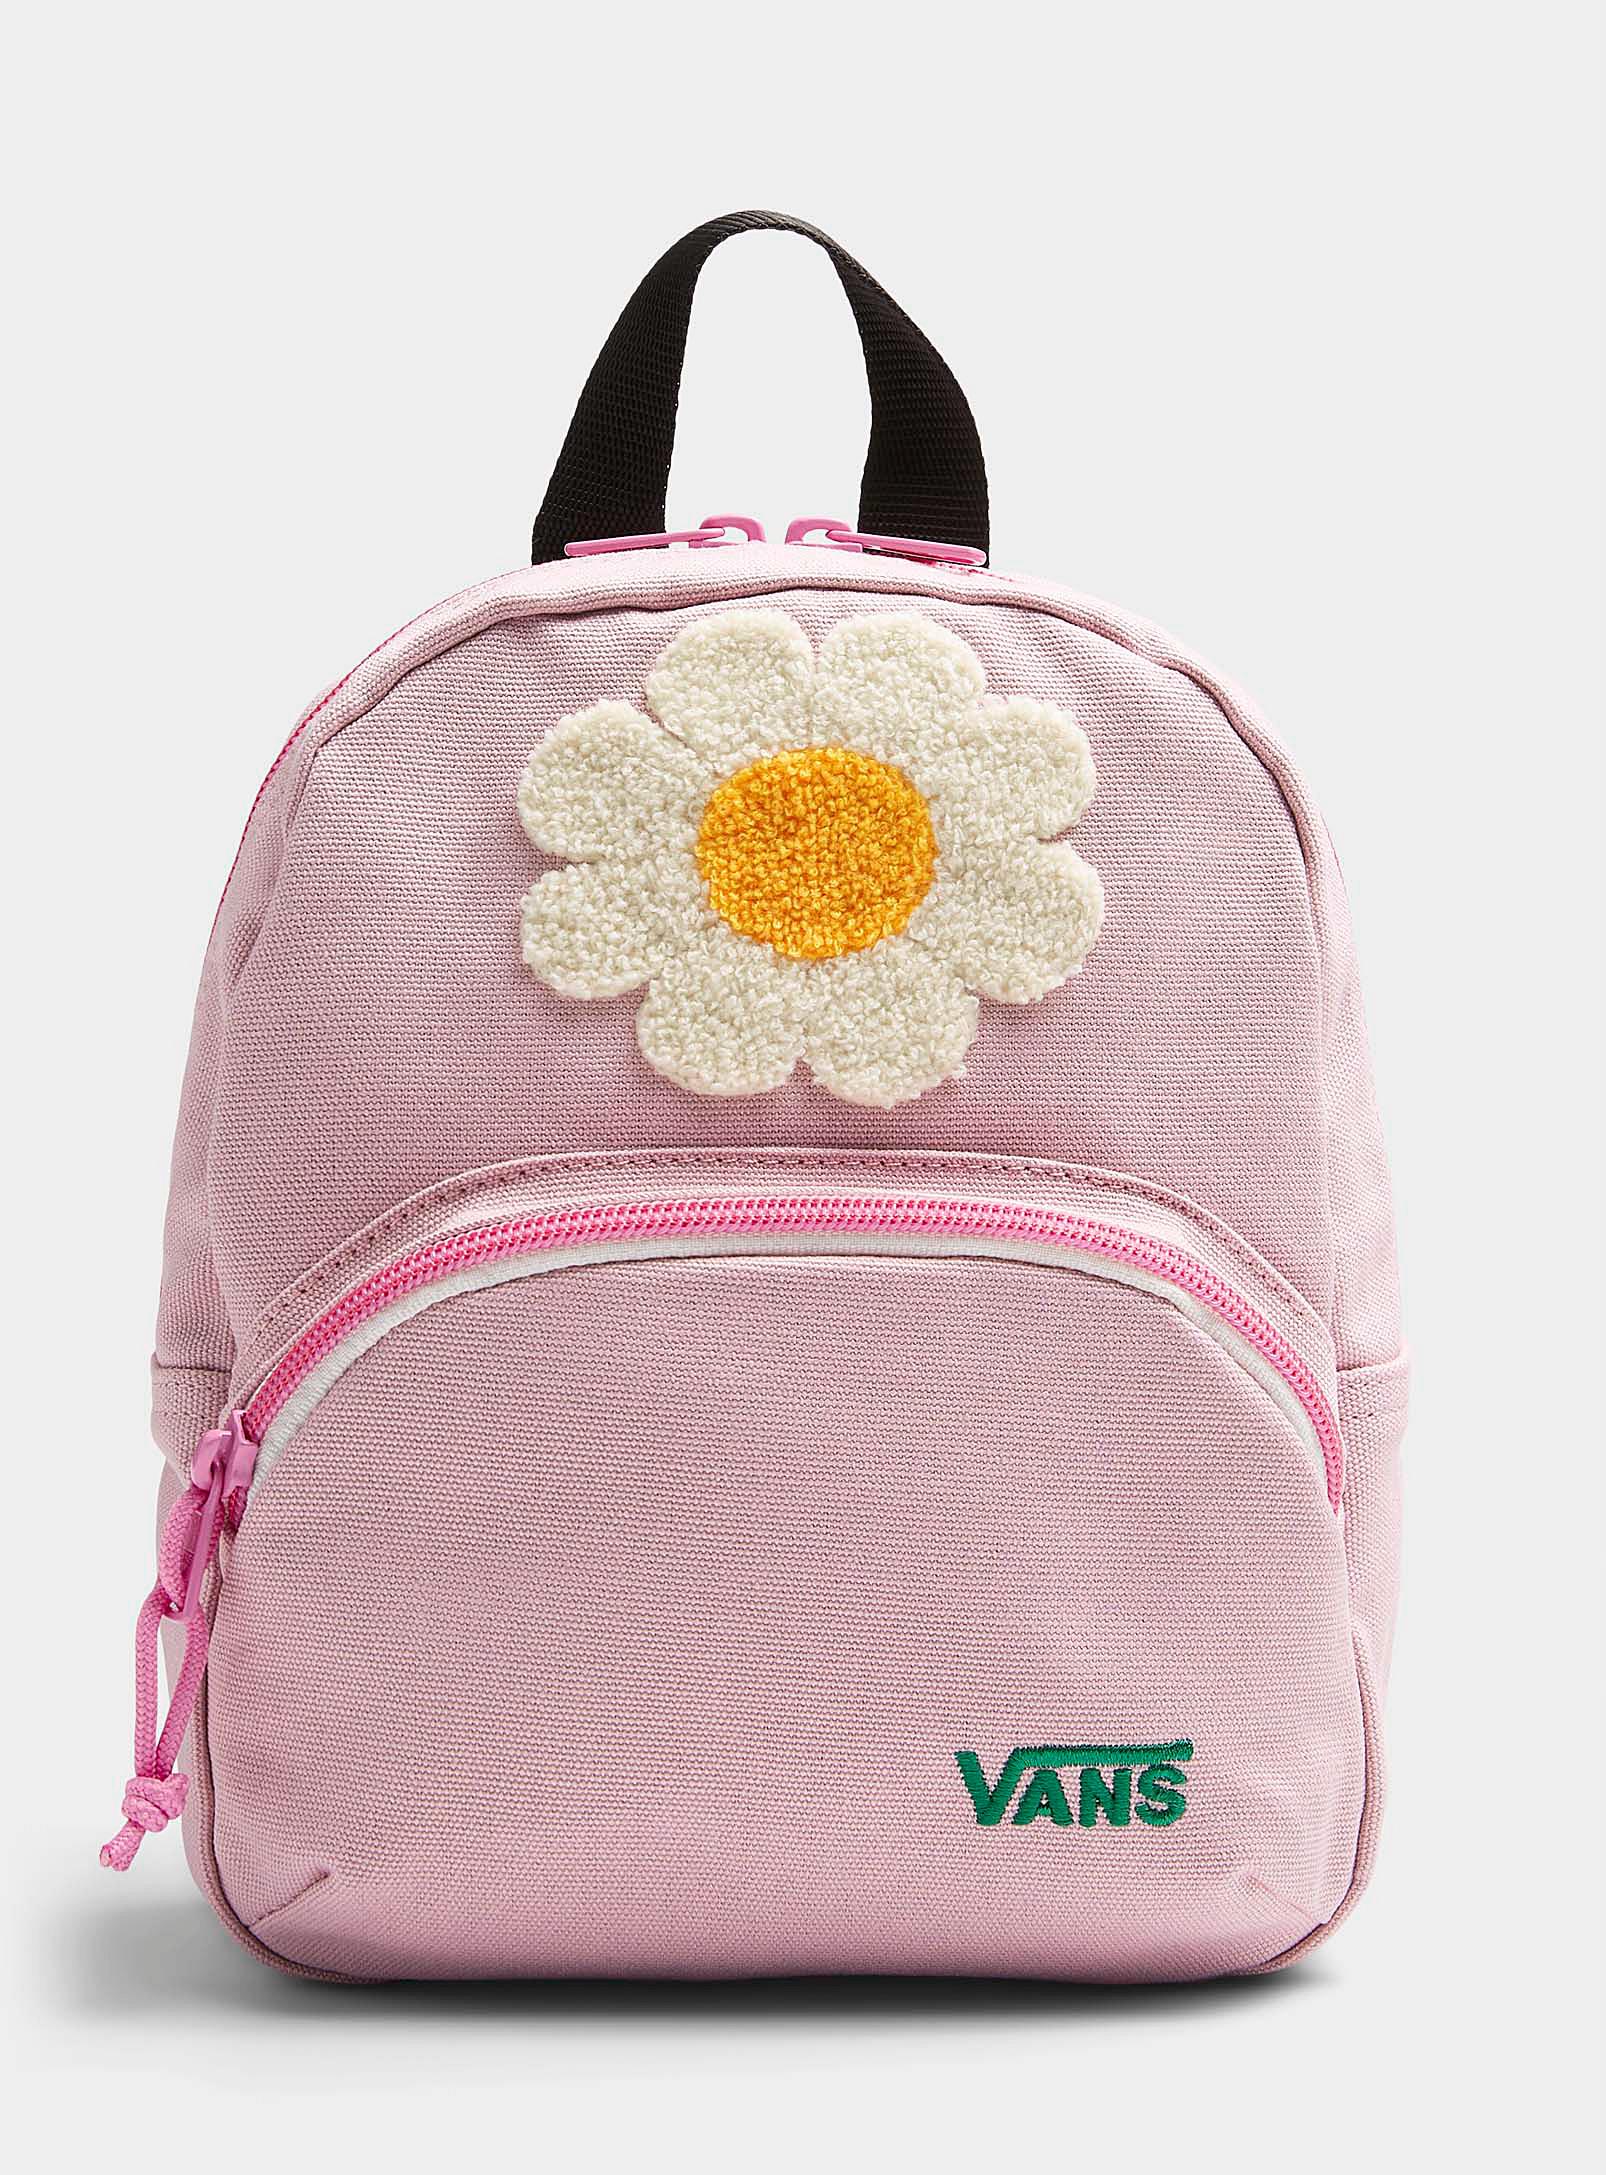 Vans Daisy Mini Backpack in Pink | Lyst